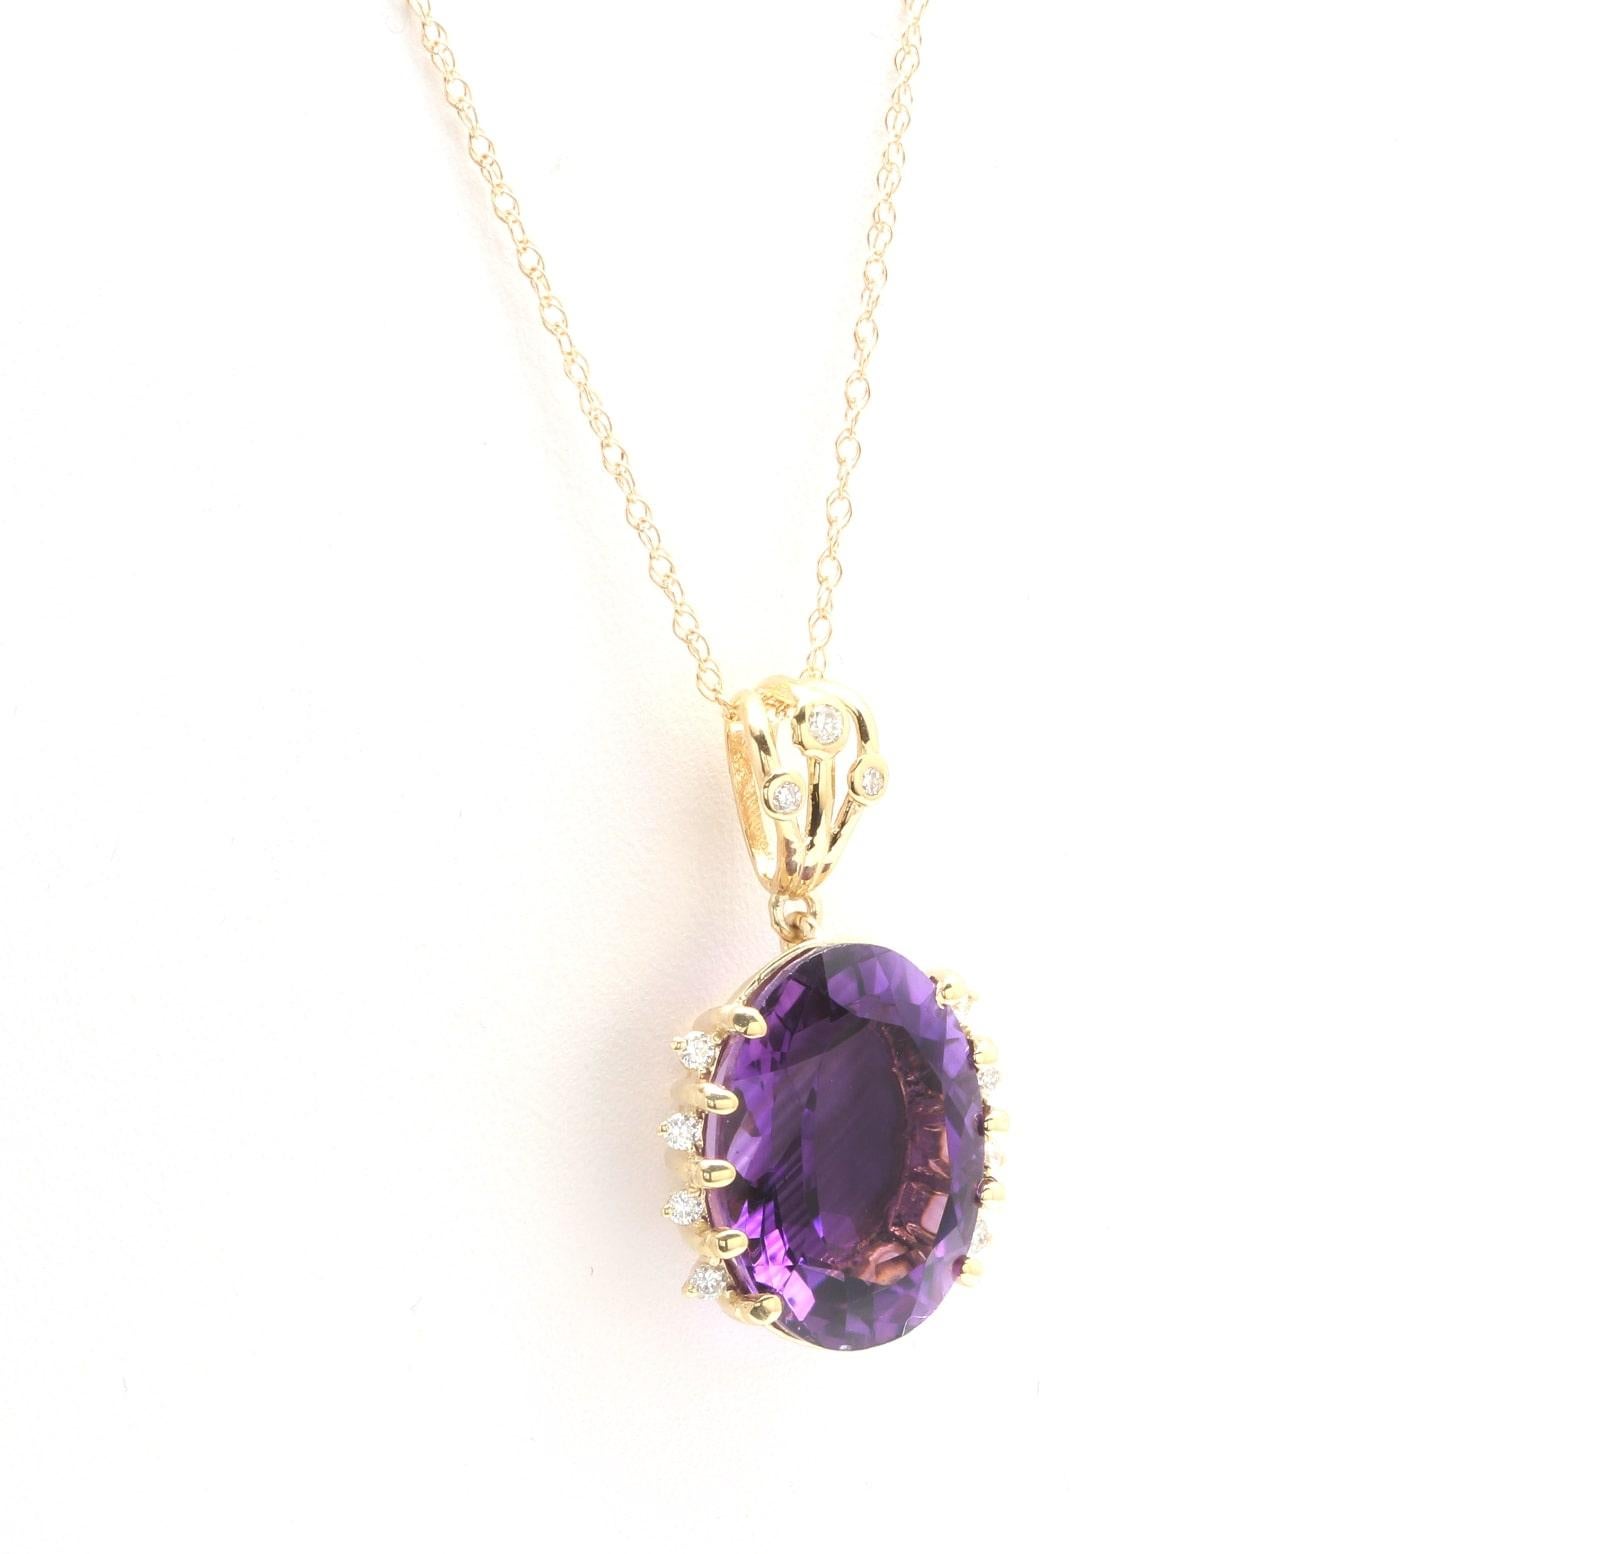 12.20Ct Natural Amethyst and Diamond 14K Solid Yellow Gold Necklace

Amazing looking piece! 

Stamped: 14K

Suggested Replacement Value: $4,500.00 

Natural Oval Cut Amethyst Weights: Approx. 12.00 Carats 

Amethyst Measures: Approx. 16.00 x